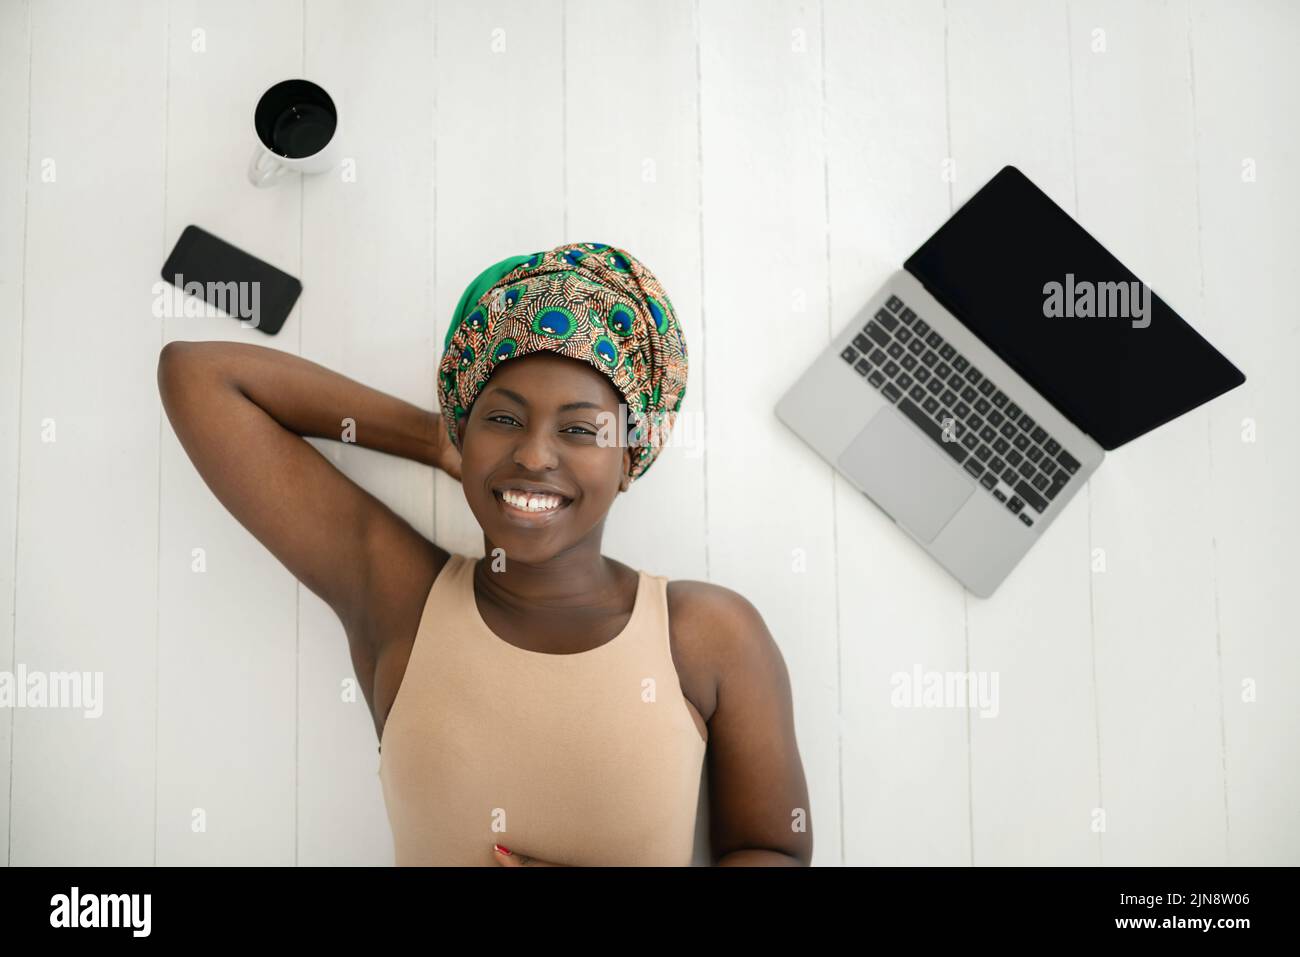 Top view shot of beautiful young African woman laying on white wood flooring, wearing traditional head tie scarf. .With Laptop, mobile phone and cup o Stock Photo